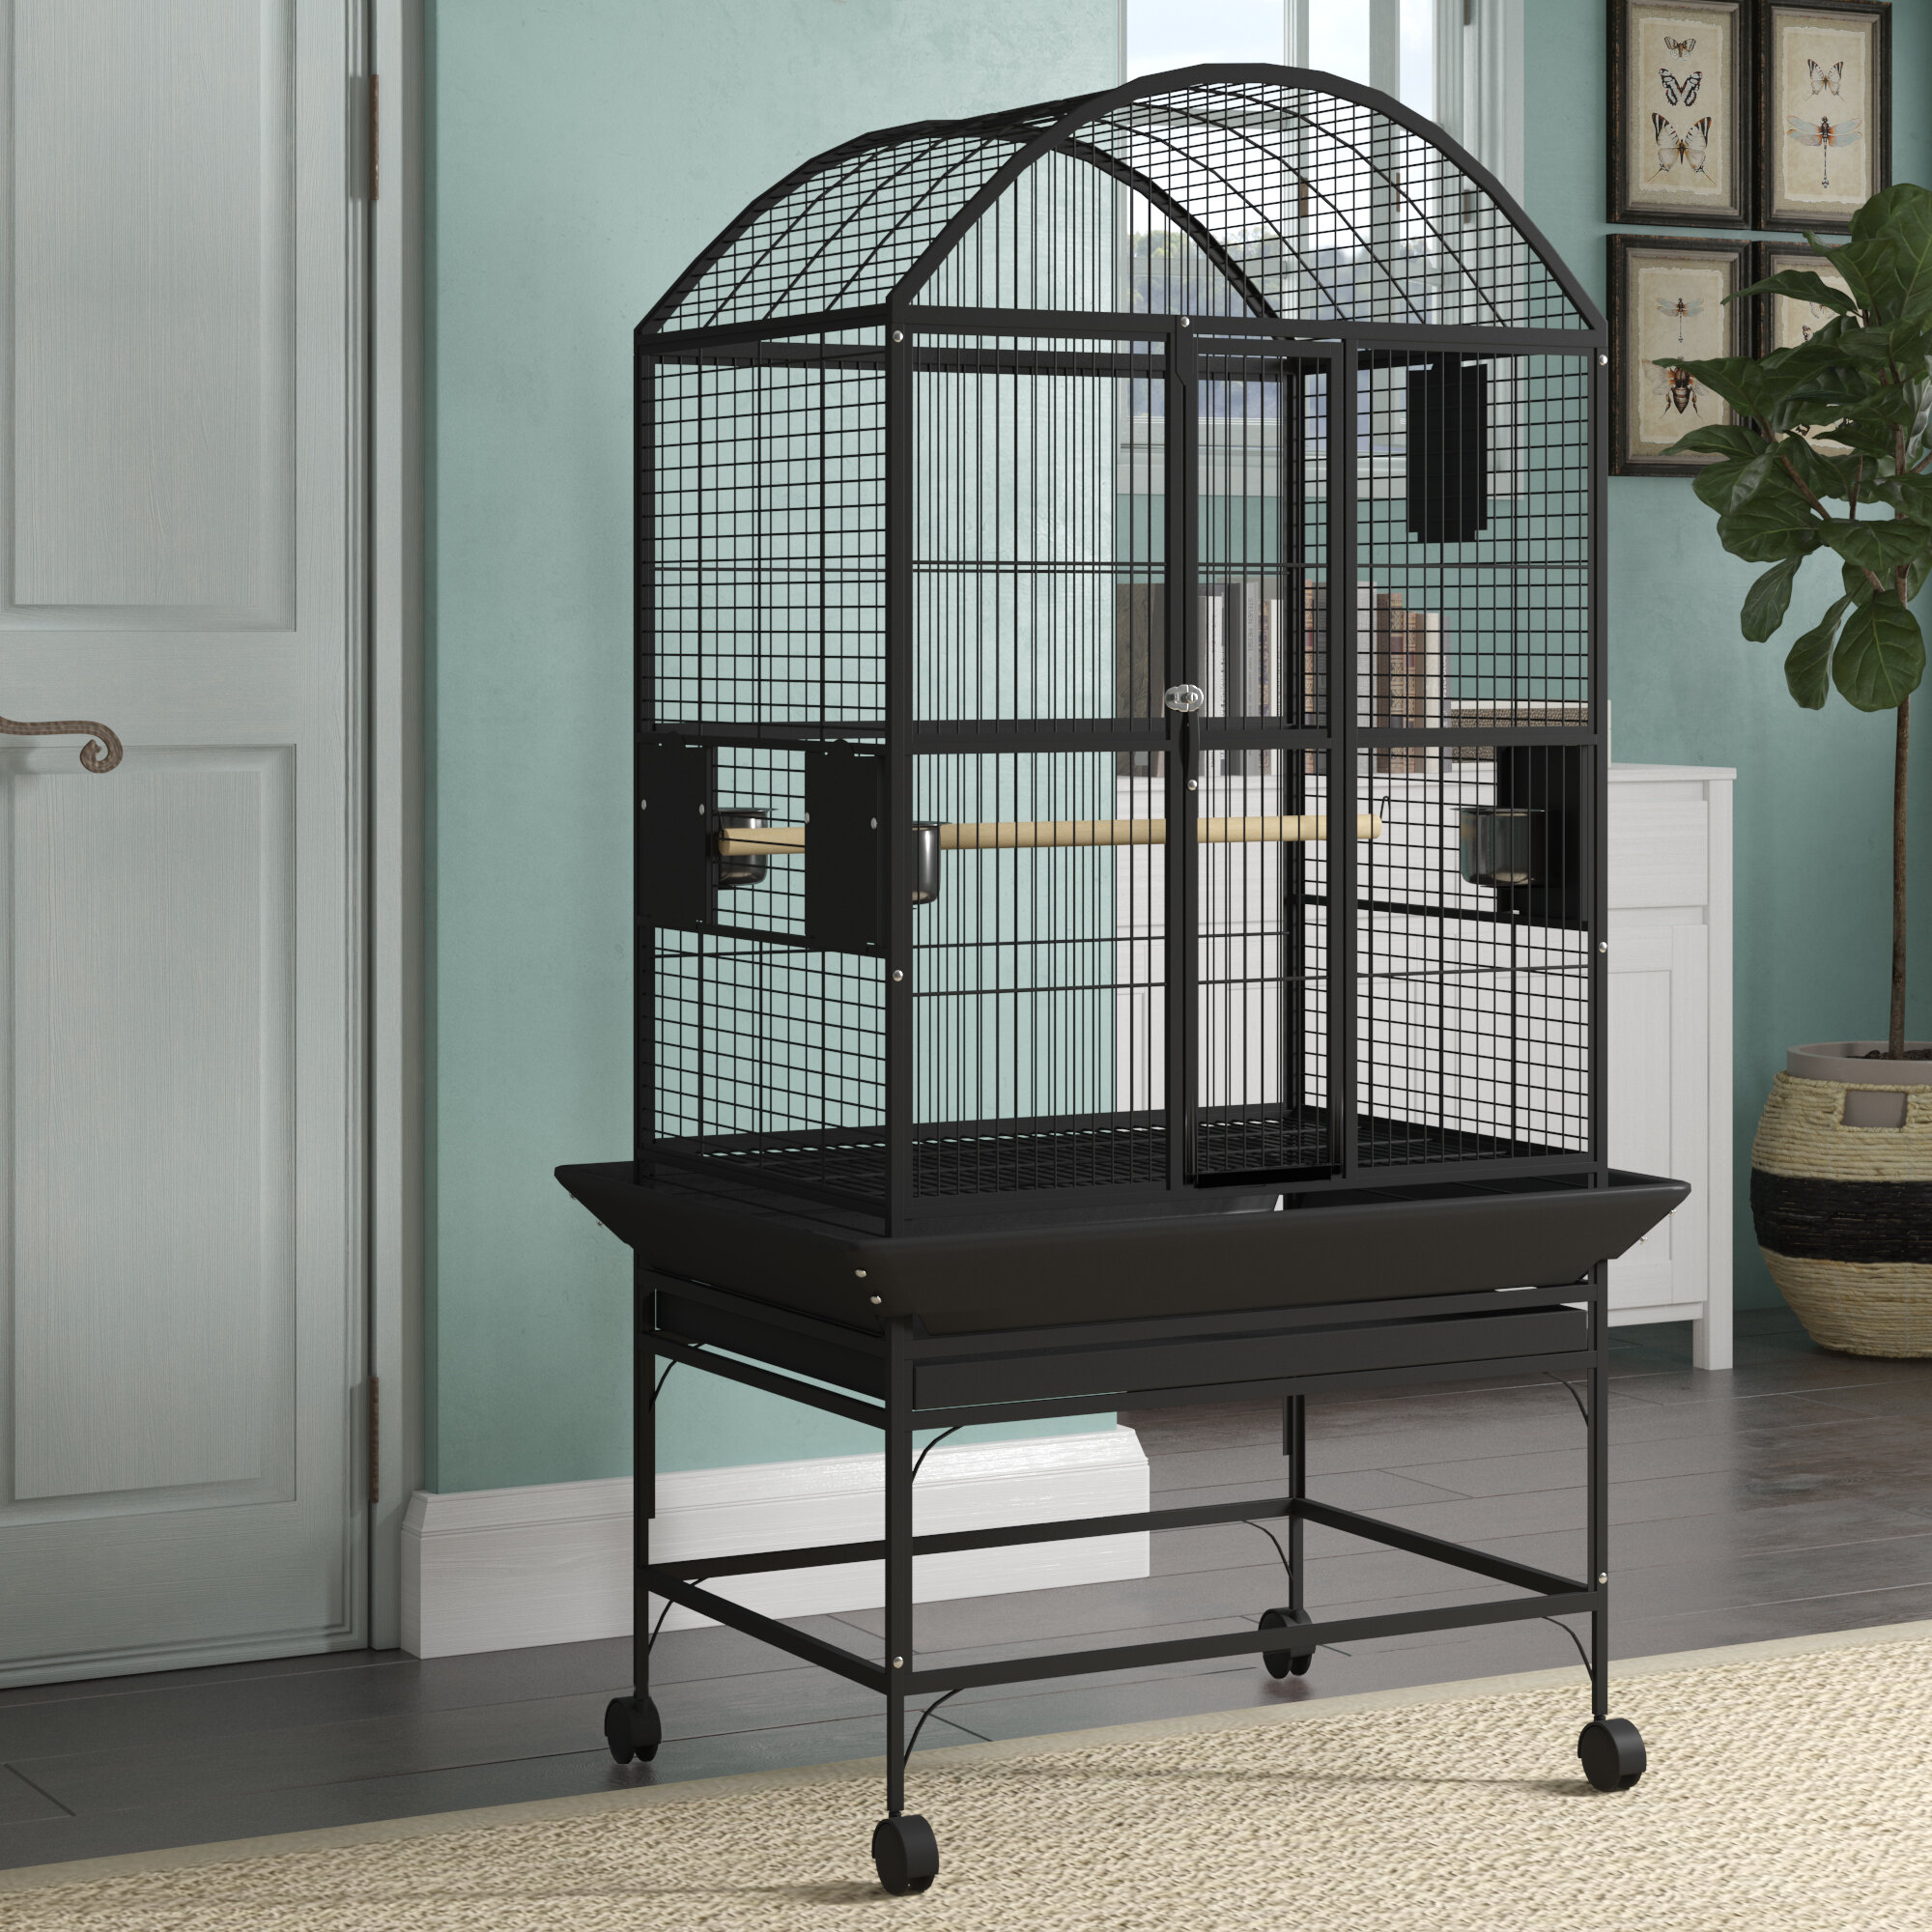 Extra Large 32 X 23 X 62H Open Play Dome Top Bird Parrot Wrought Iron Cage for Large Bird 